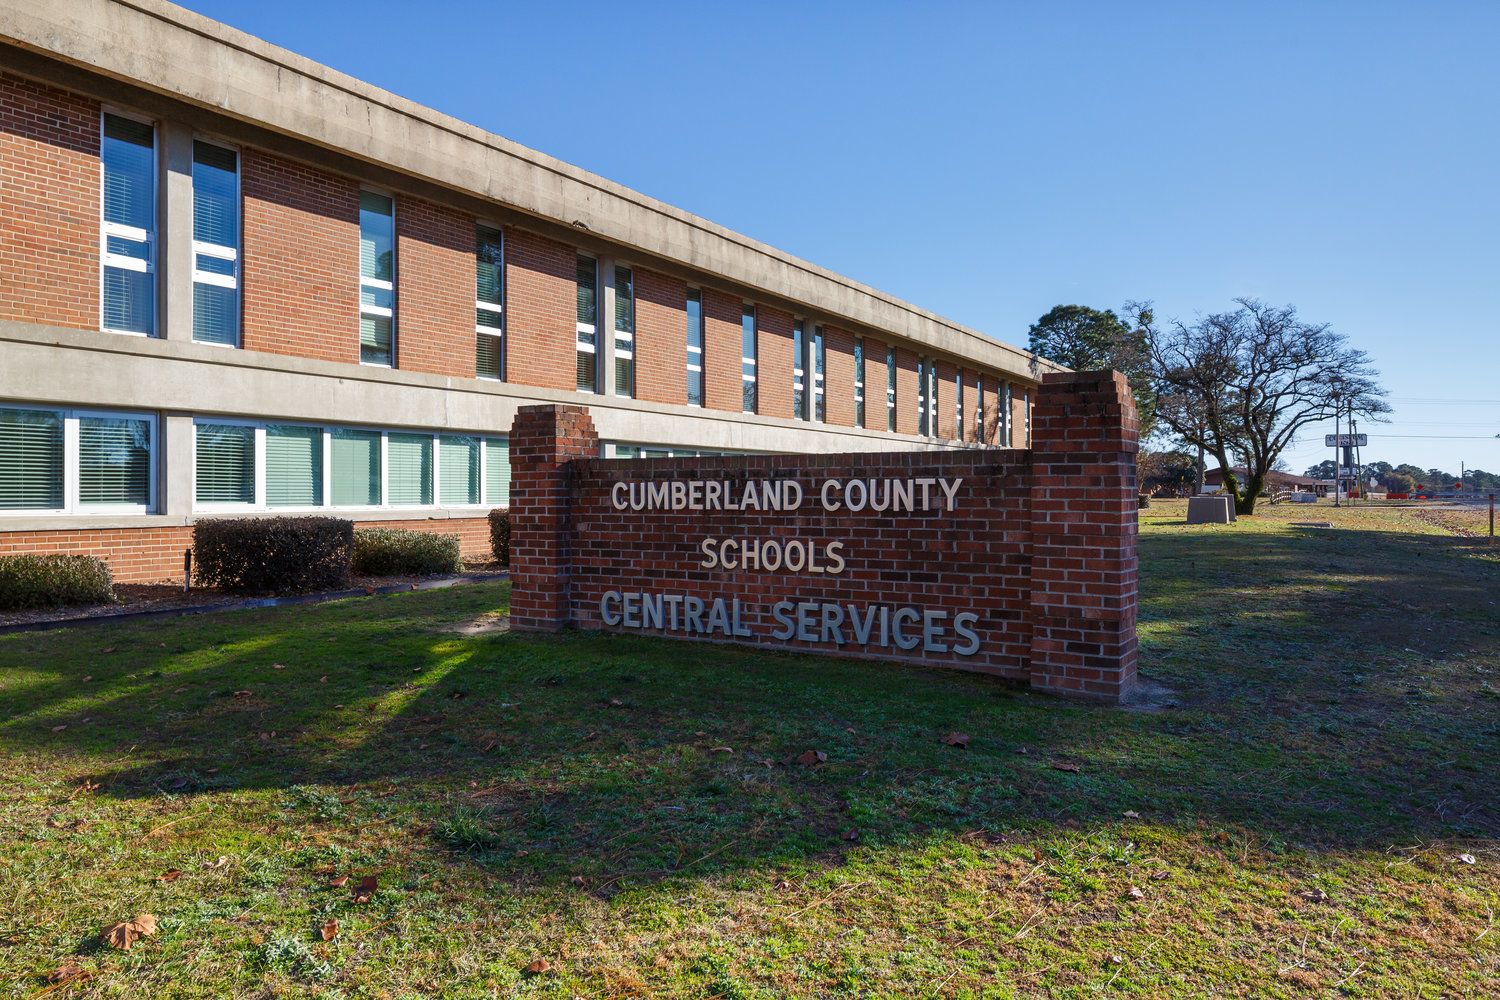 The Cumberland County Board of Education met Tuesday to discuss transfers of surplus property and other issues.